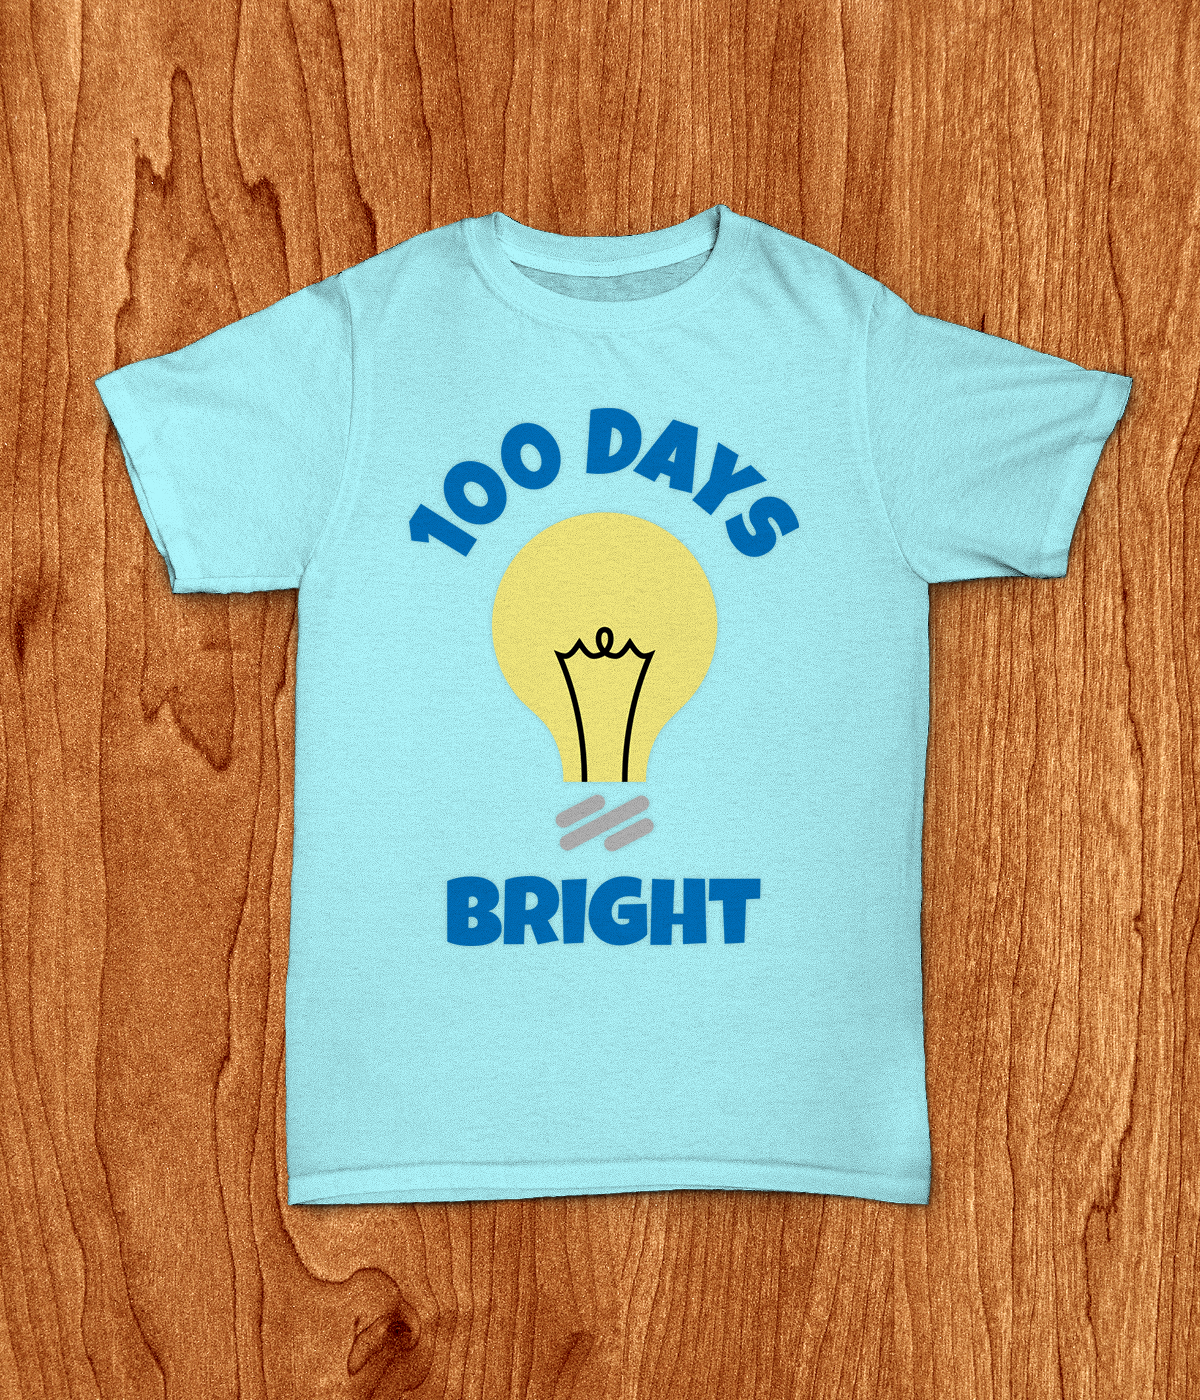 Light blue shirt on wood background. Shirt has a light bulb design with the words "100 days bright" around it.